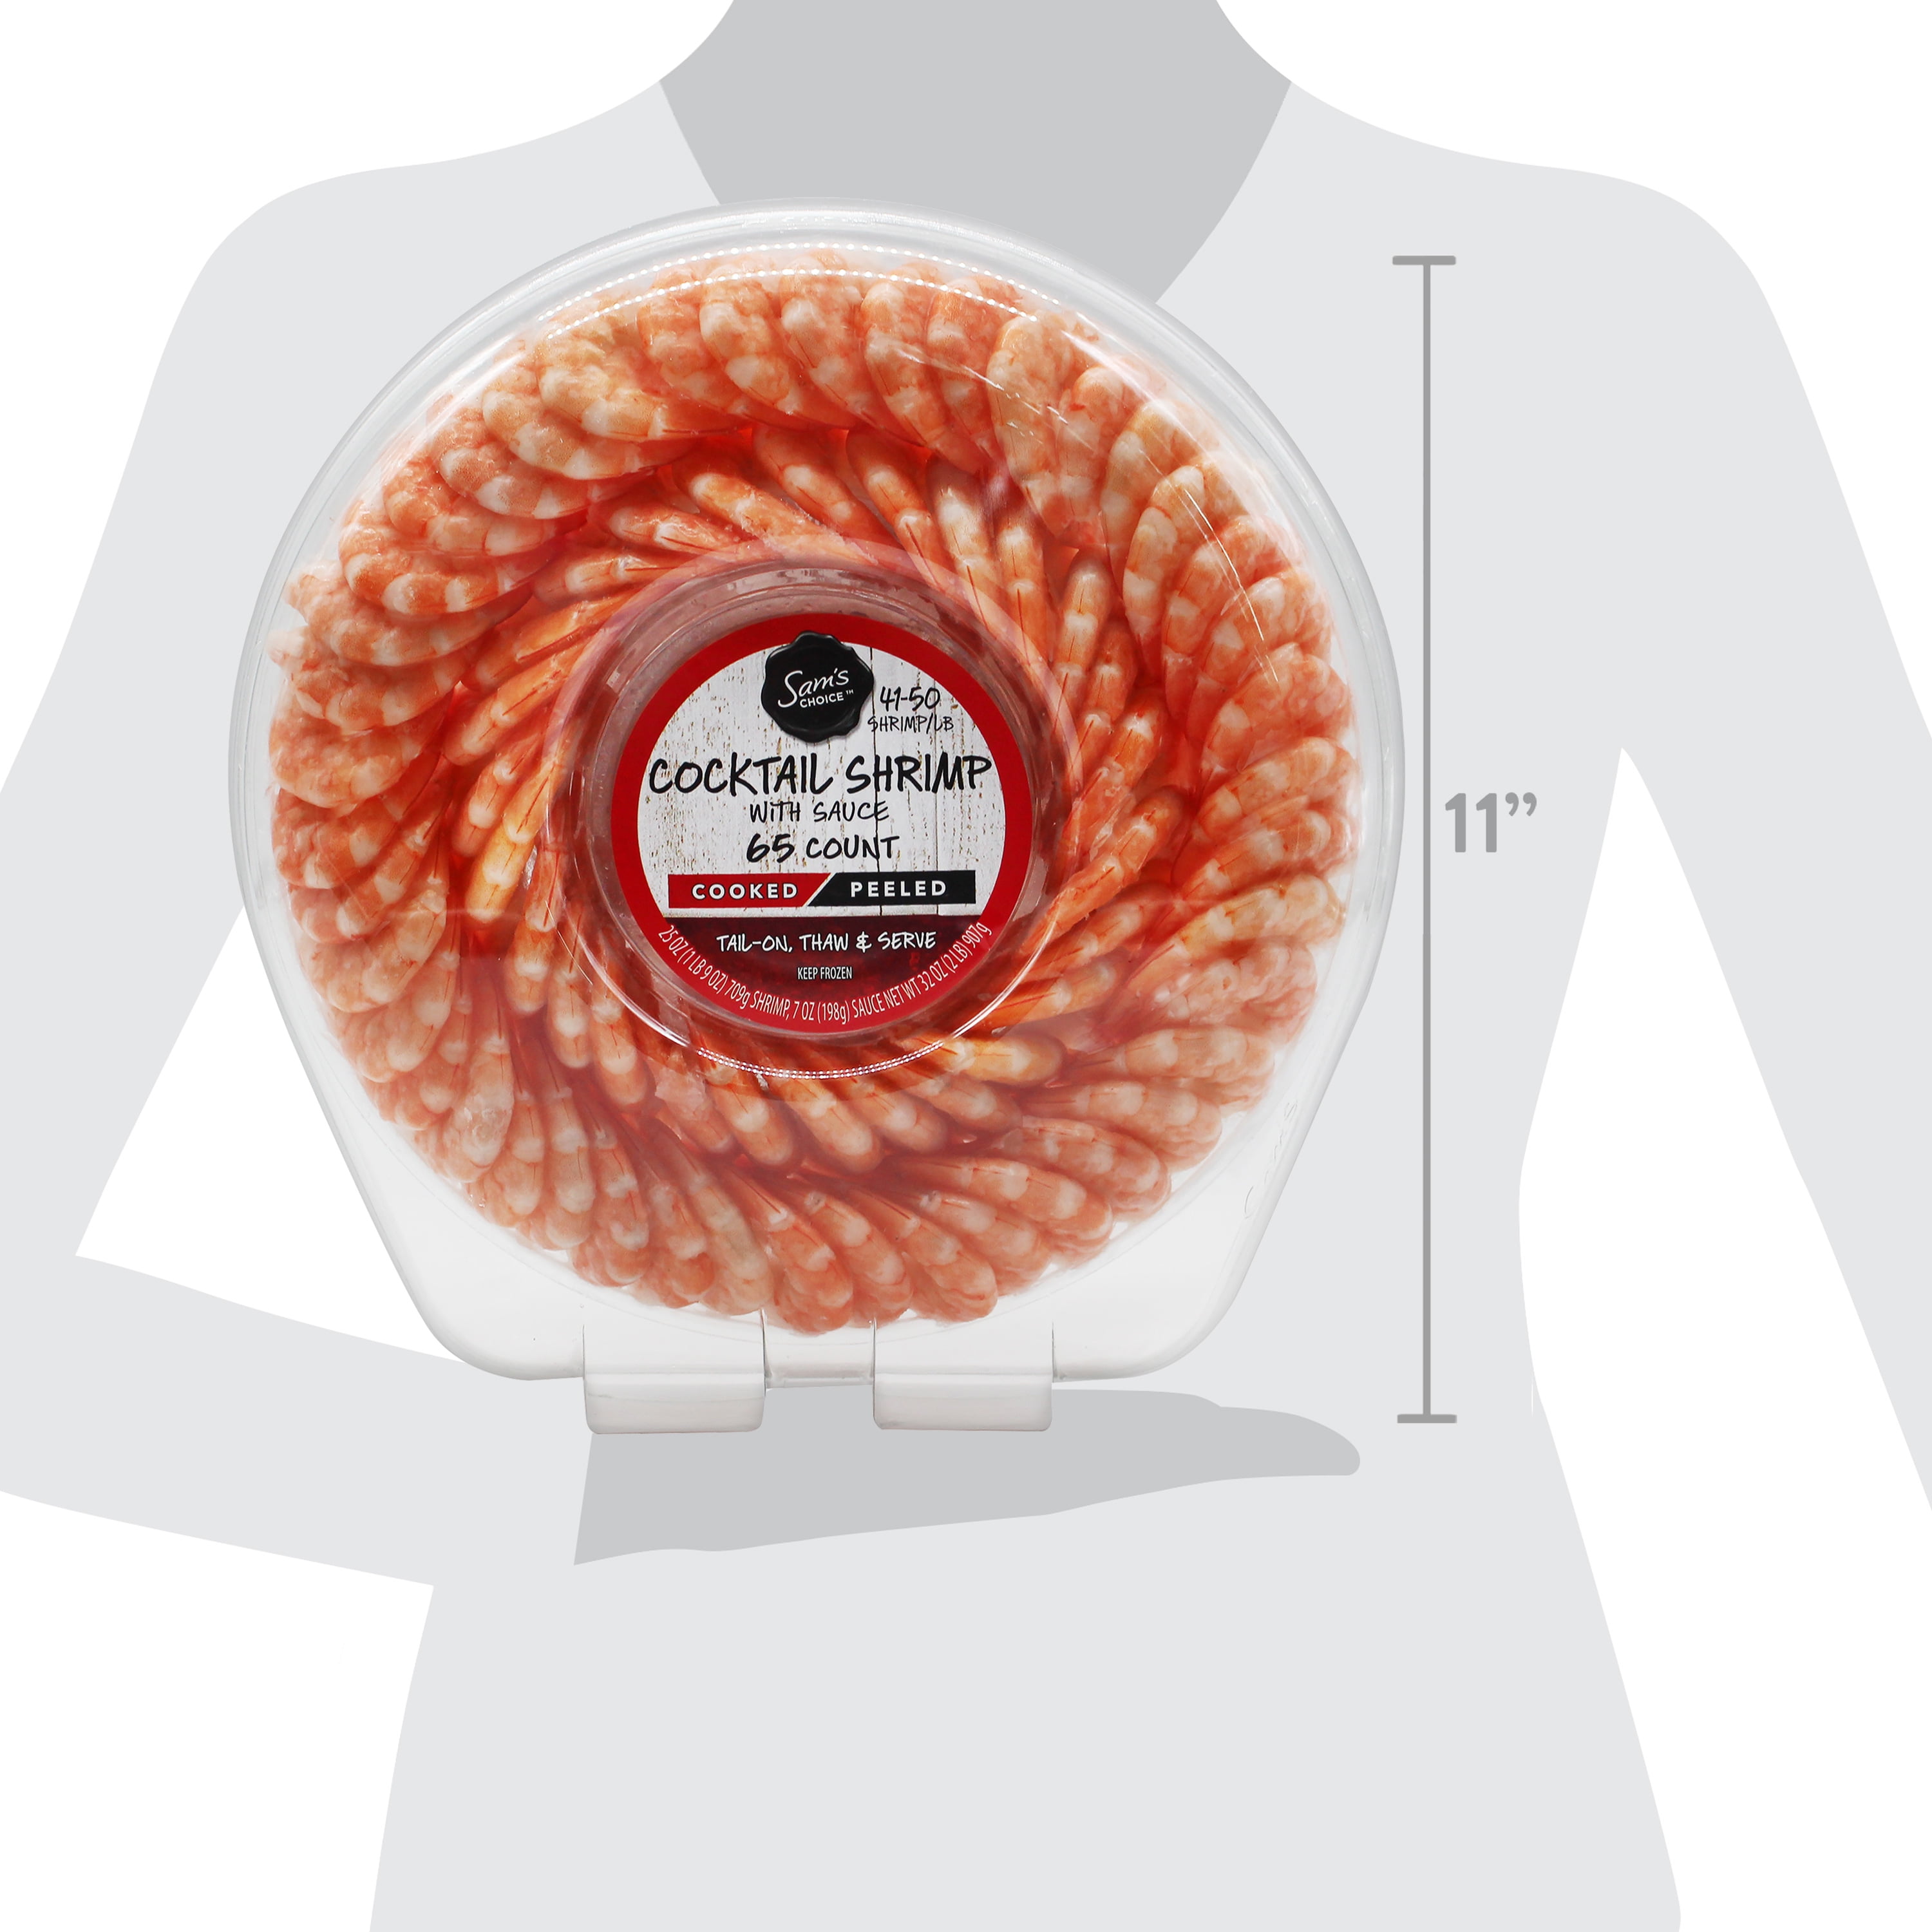 Sam's Choice Frozen Peeled Deveined Shrimp Cocktail Ring with Sauce, 20 oz